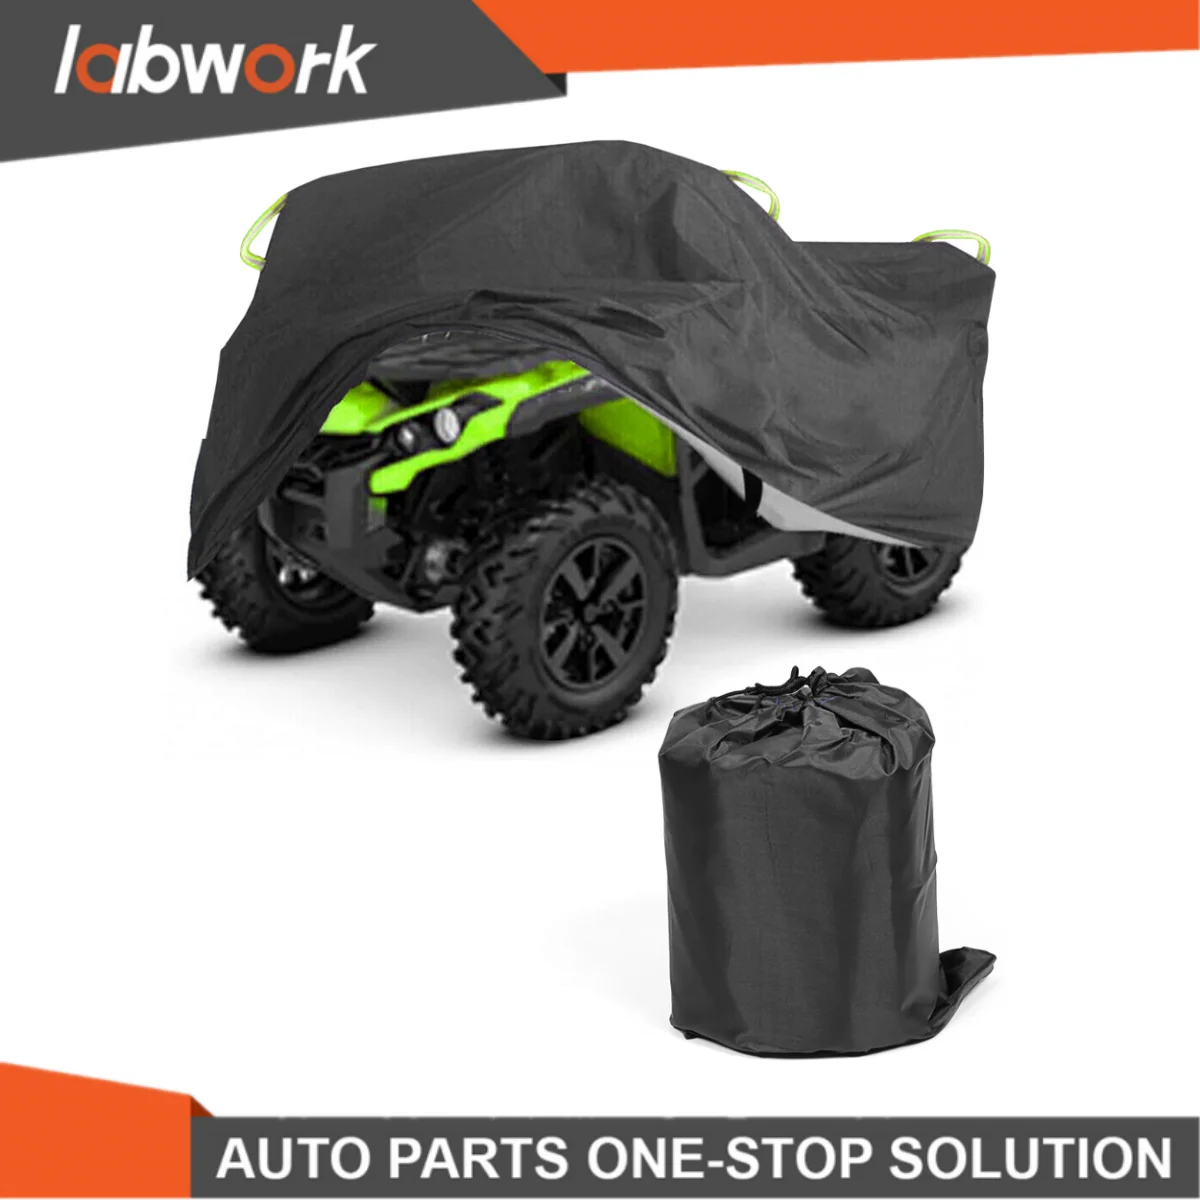 

Fit For Can-Am Outlander 450 570 650 850 1000R Waterproof Cover Universal XXXL